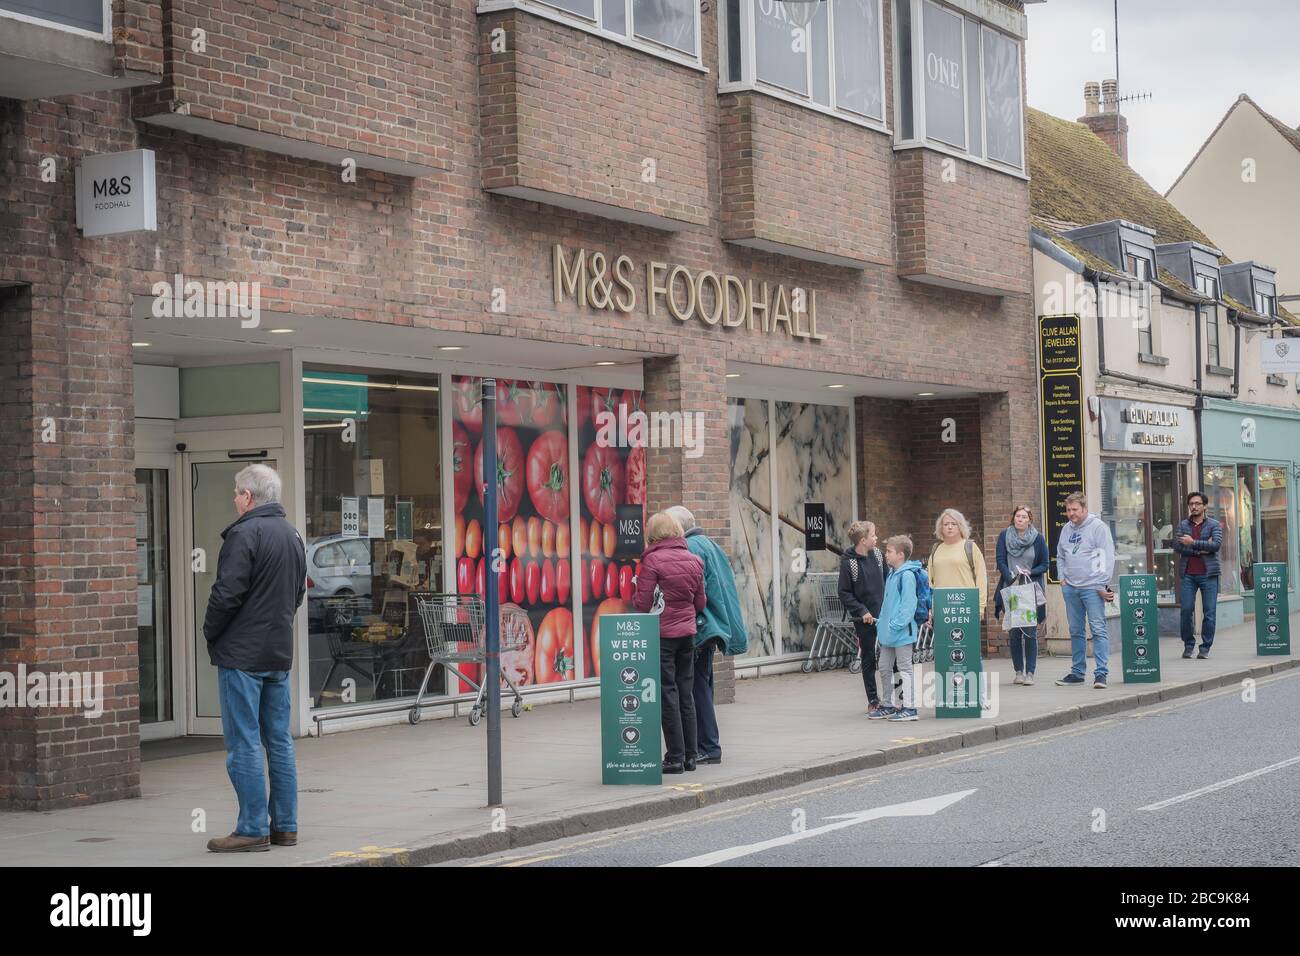 High Street, Reigate, Surrey, UK - April 3, 2020 - shoppers queueing outside M&S supermarket, maintaining social distancing to stop coronovirus spread Stock Photo